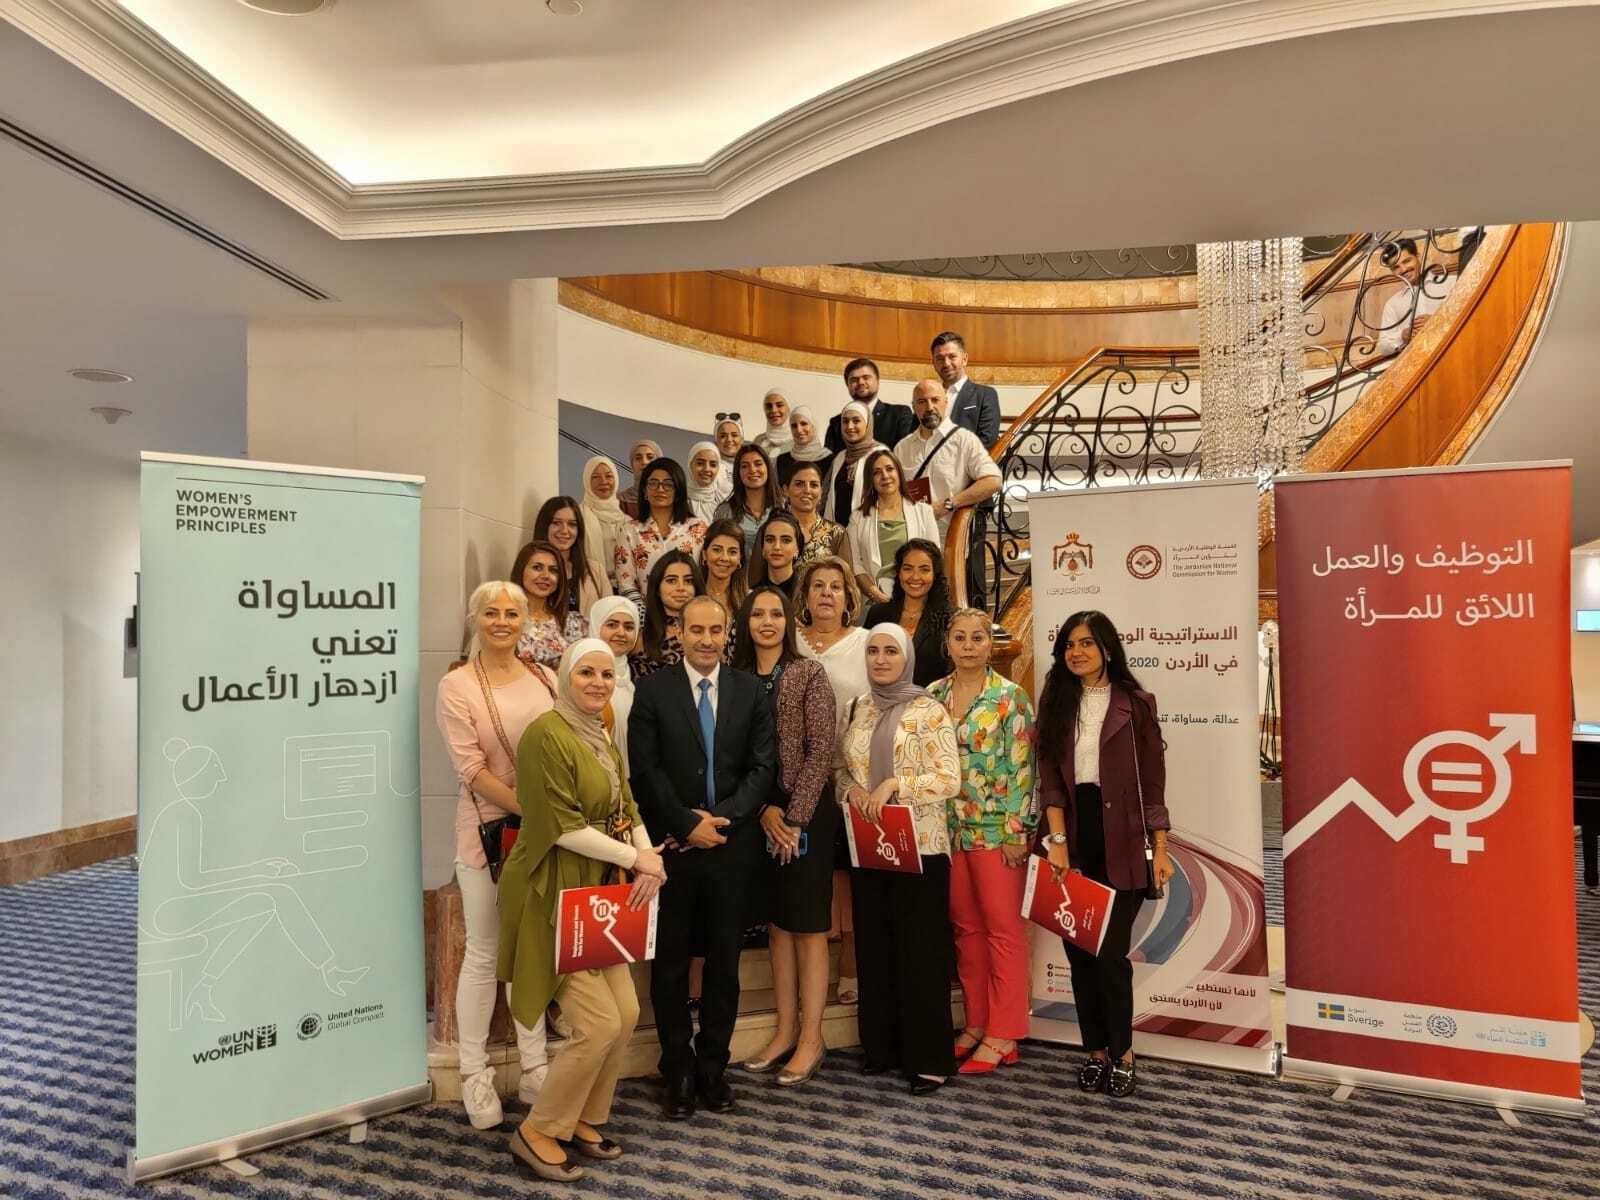 Participants at the Participatory Workshop on Developing the Implementation Plan of the National Strategy for Women in Jordan (2020-2025) for the WEPs signatories. Photo Courtesy of Grand Hyatt.